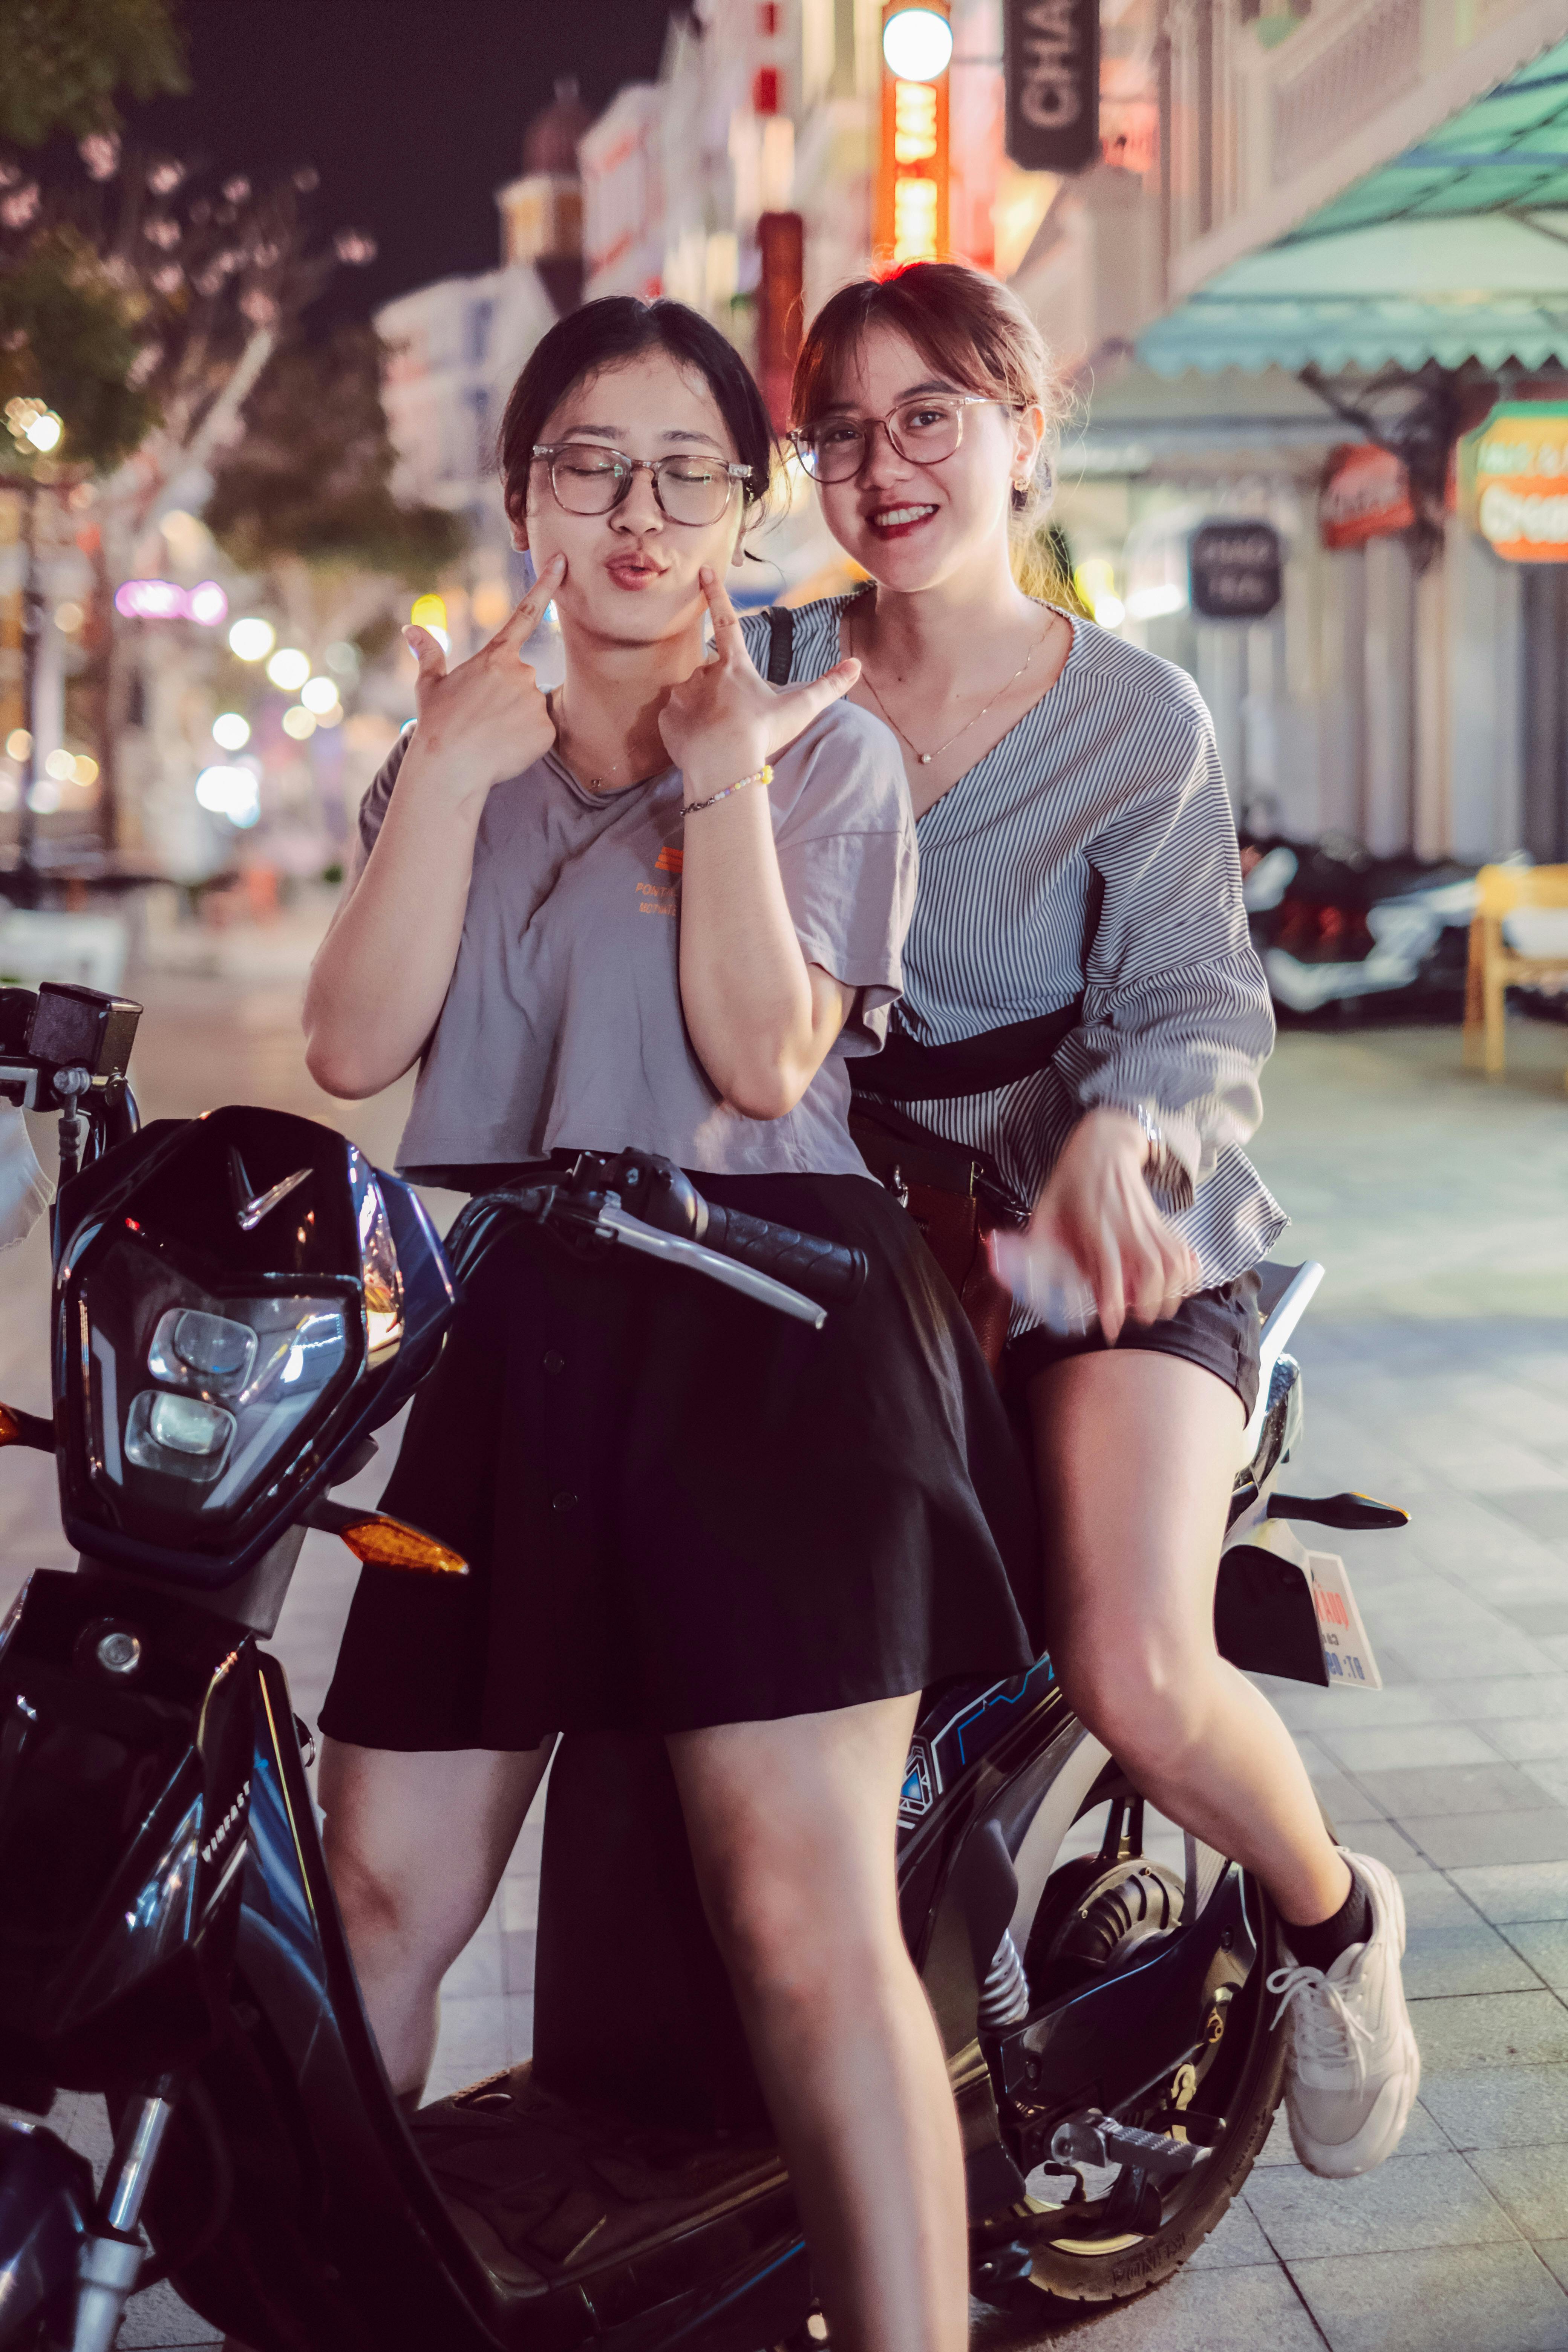 Couple Sitting On Scooter Together Posing Stock Photo 723619819 |  Shutterstock